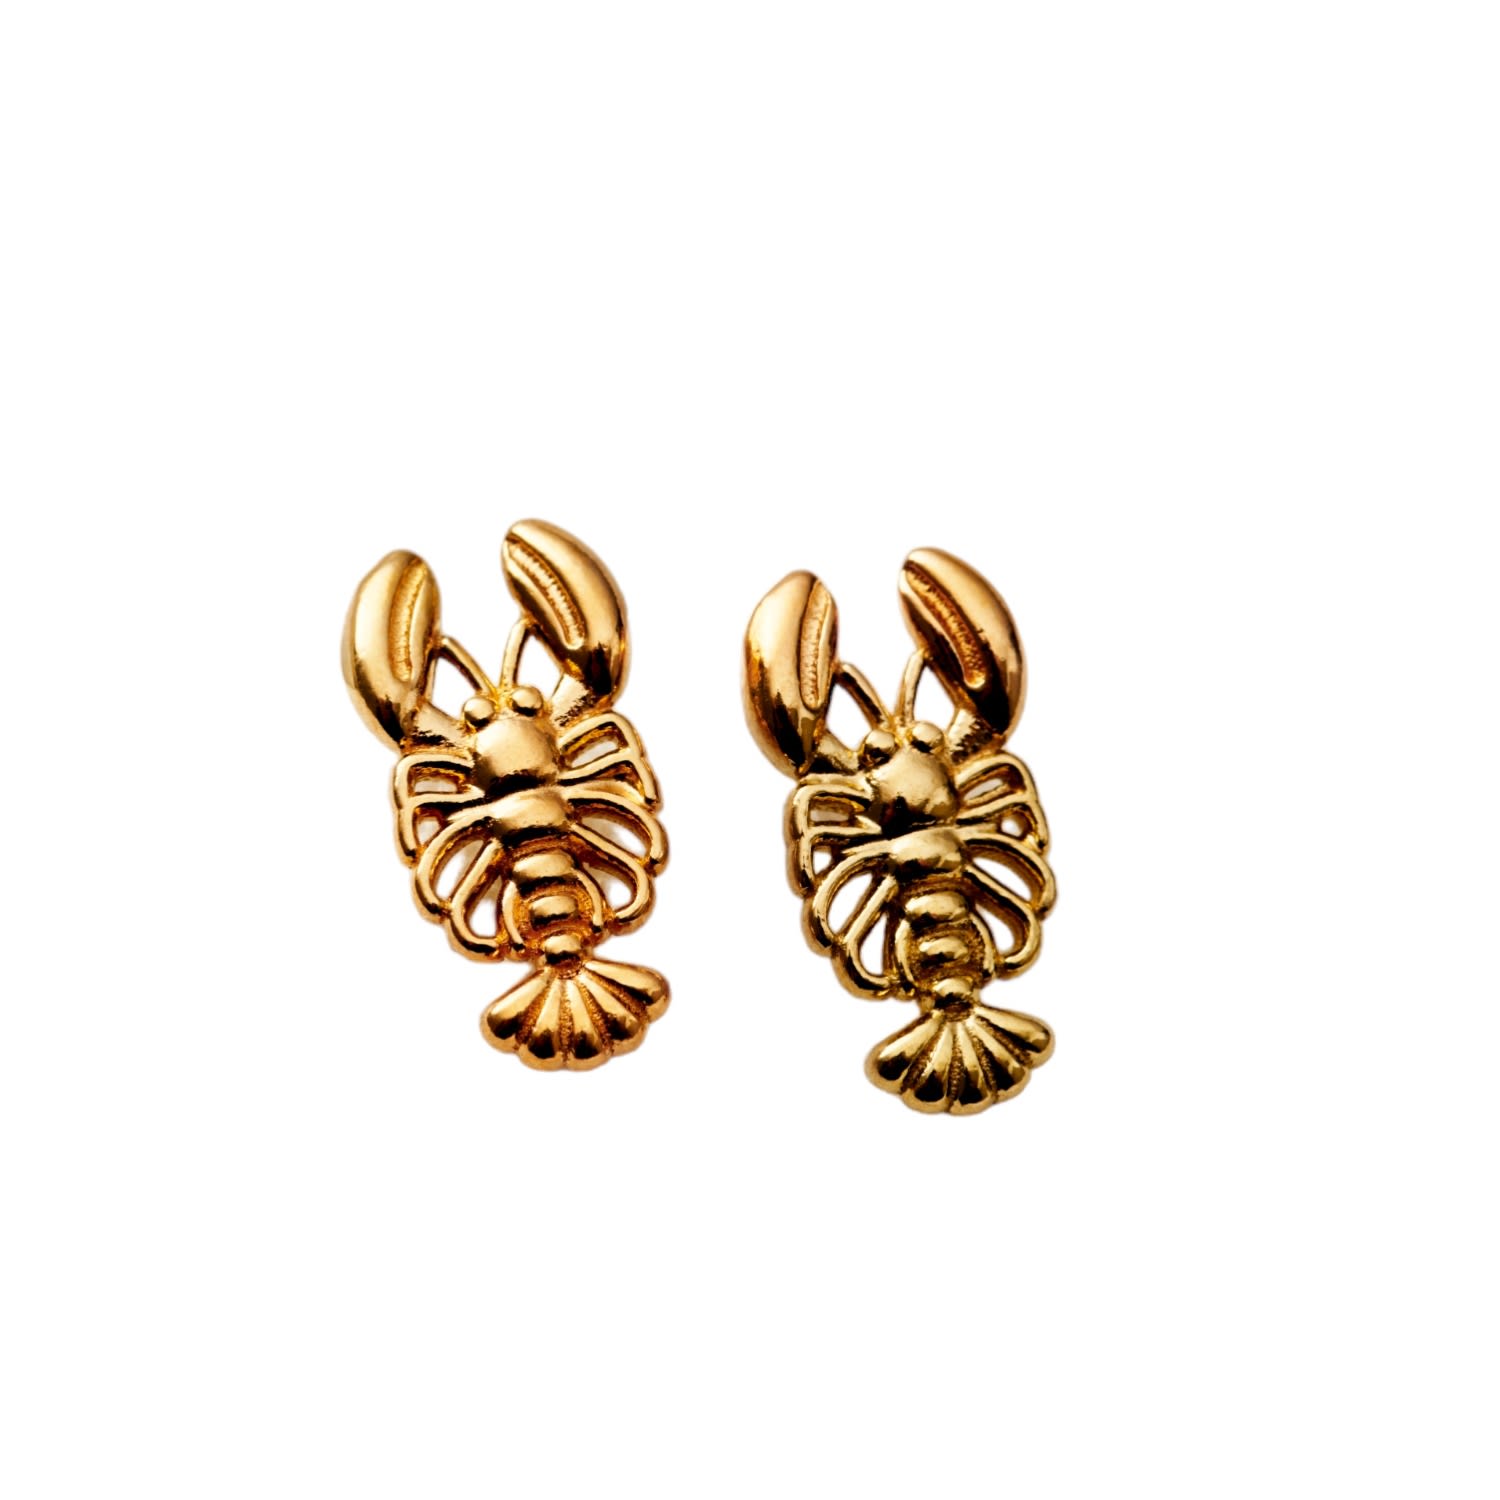 Shop Posh Totty Designs Women's Yellow Gold Plated Lobster Stud Earrings